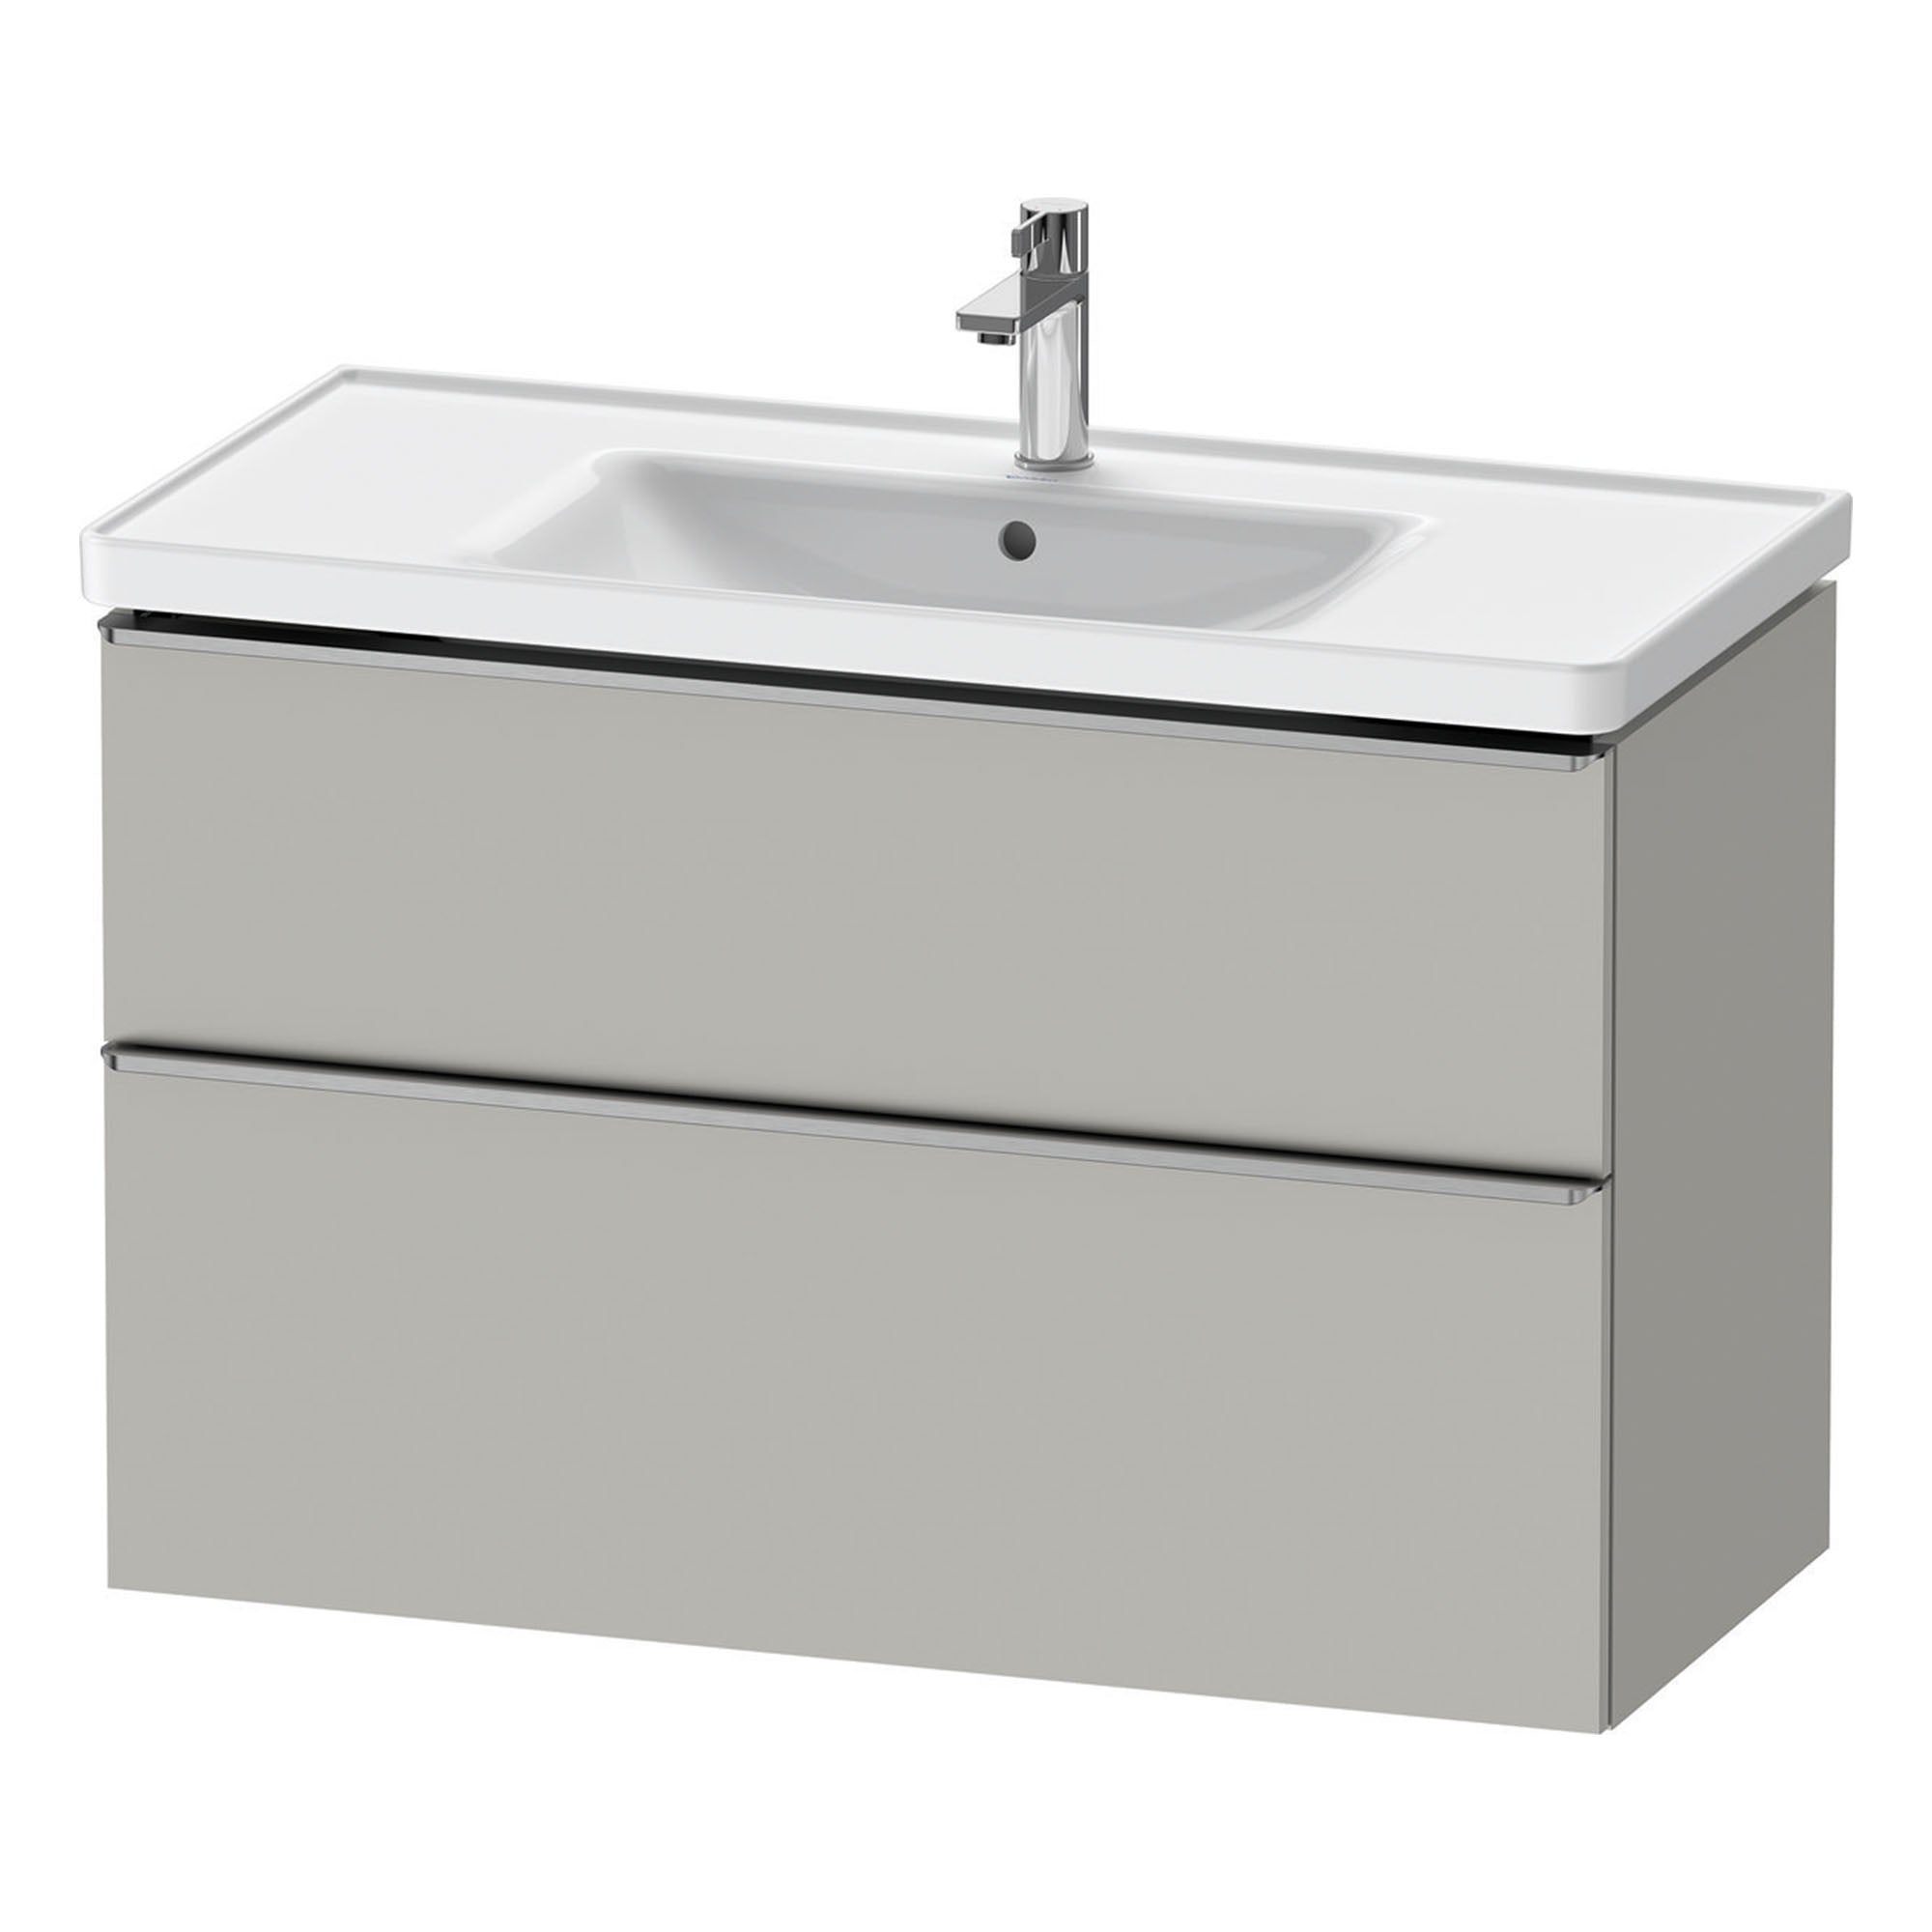 duravit d-neo 1000mm wall mounted vanity unit with d-neo basin concrete grey stainless steel handles